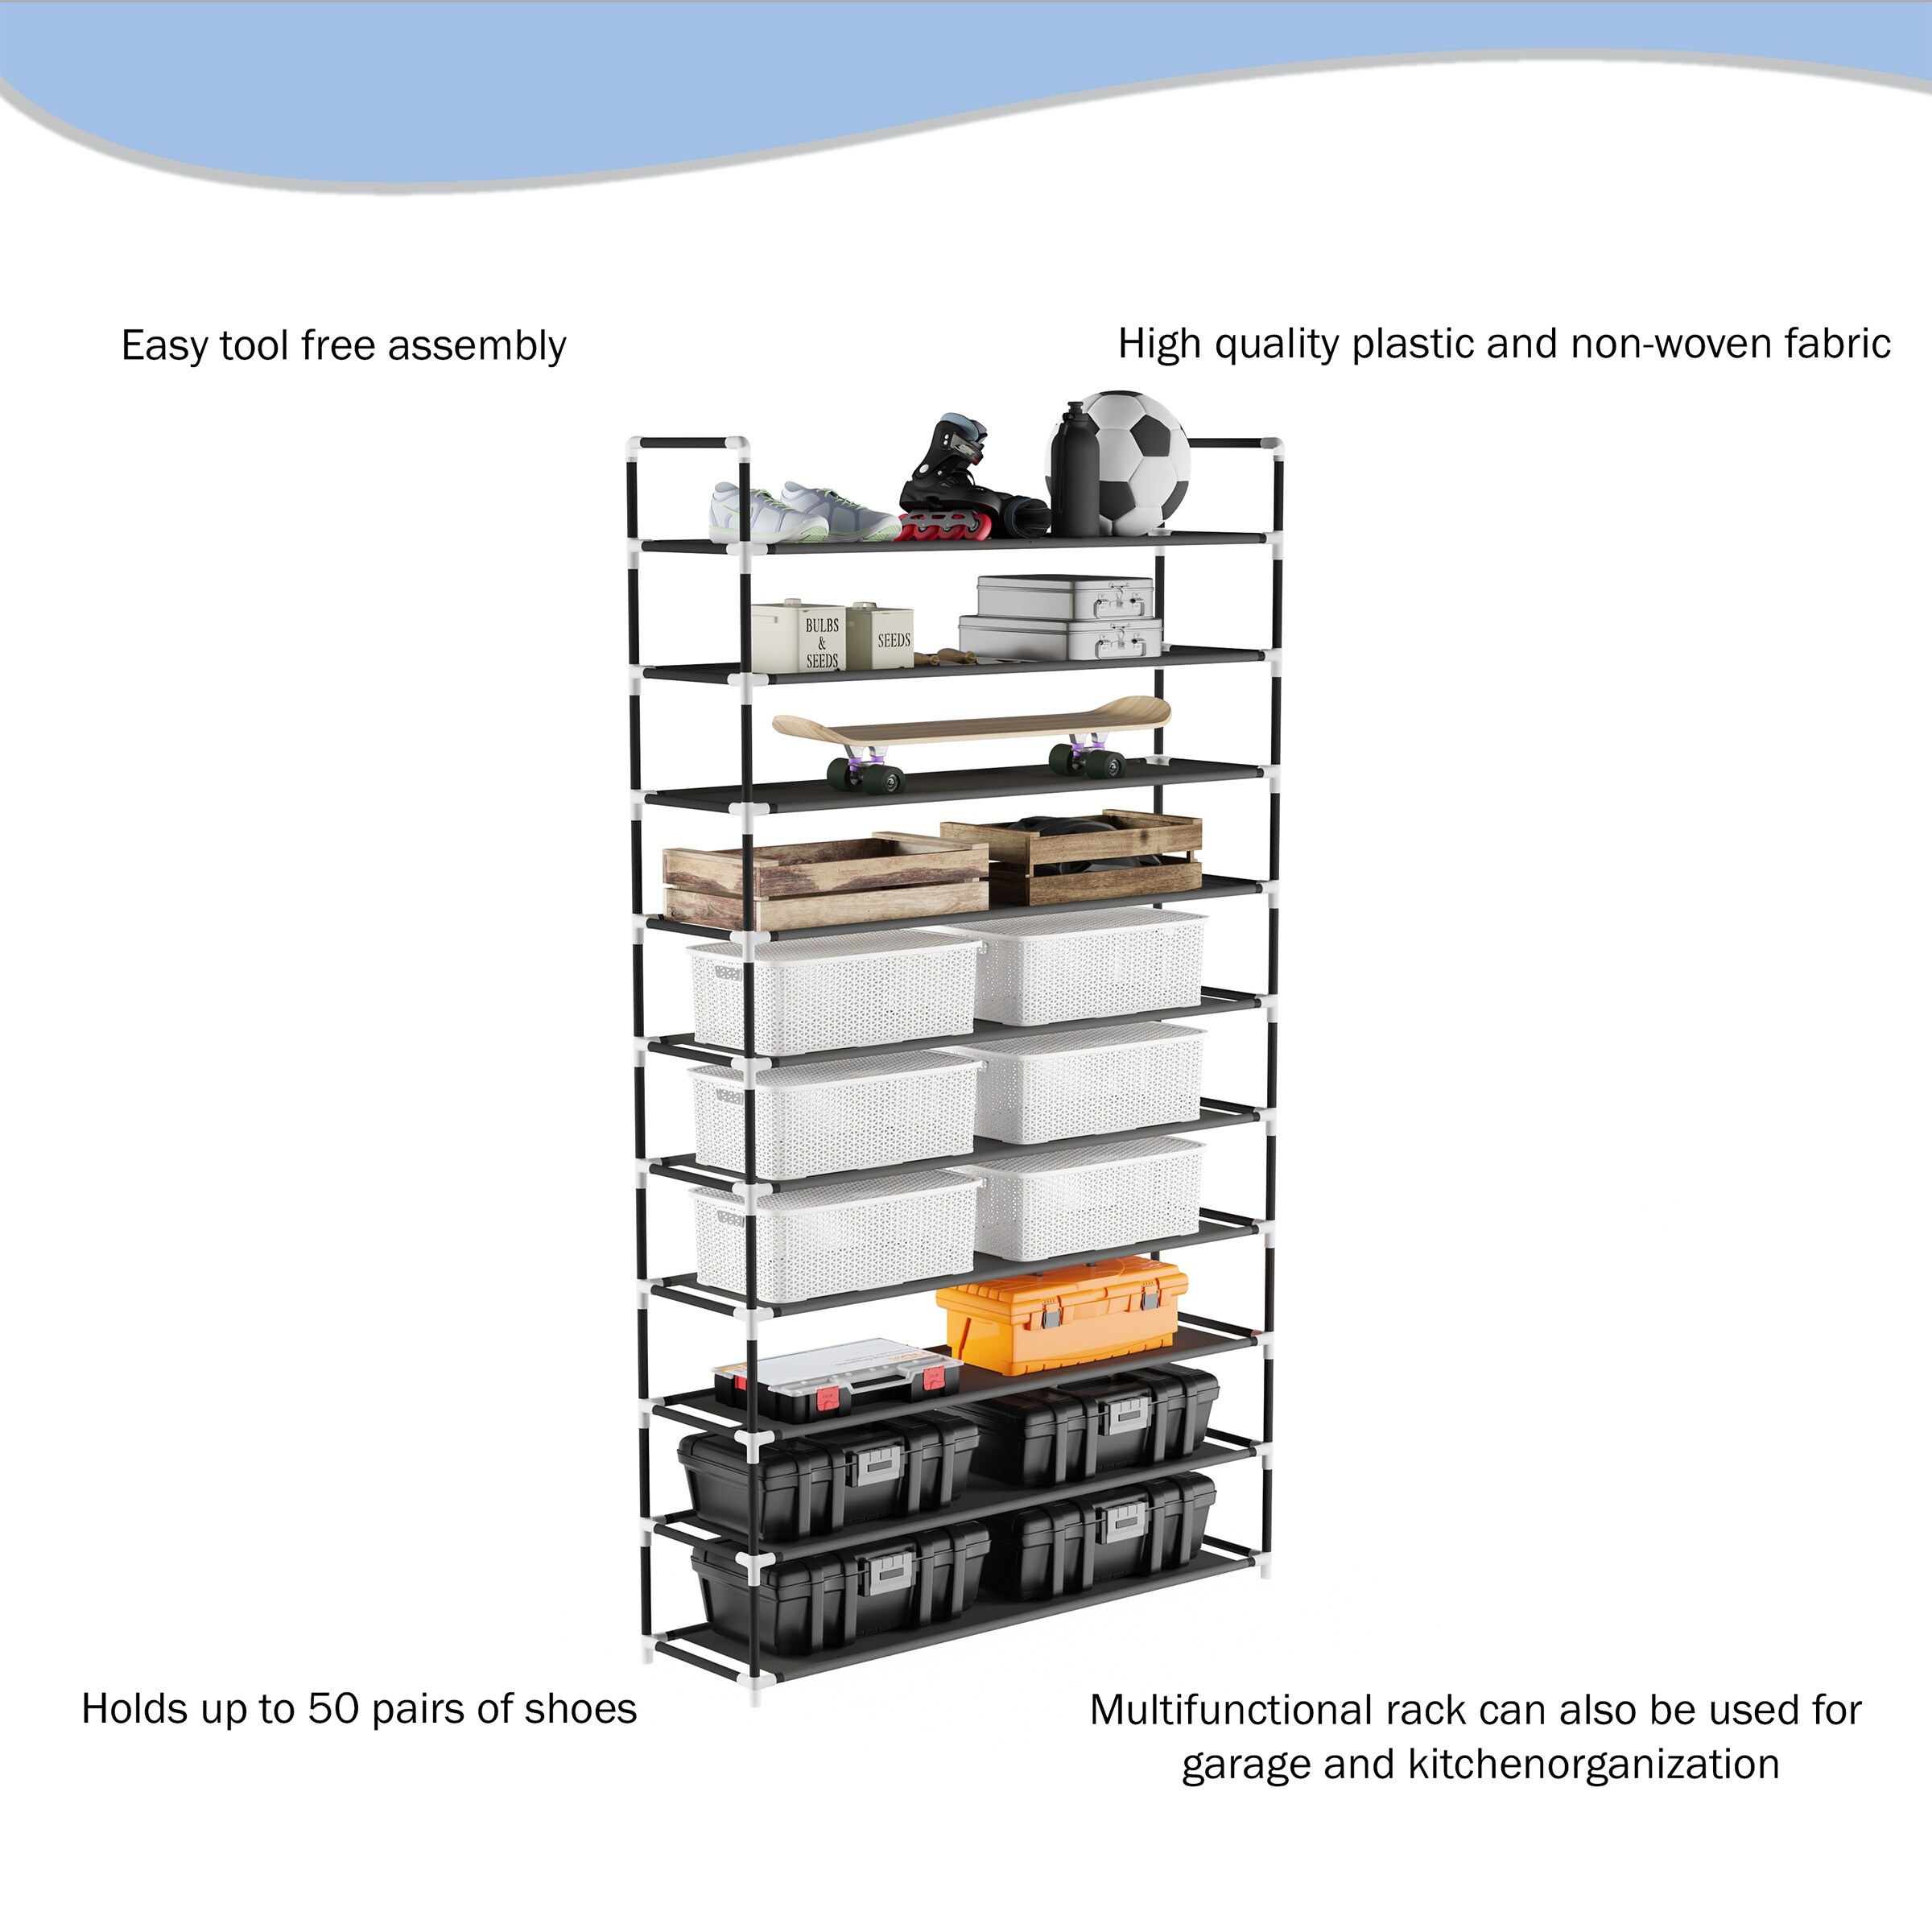 https://ak1.ostkcdn.com/images/products/is/images/direct/f98b33185bc88ad52c06ce5c1473a1f04b44f0a6/Shoe-Rack--Tiered-Storage-for-Sneakers%2C-Heels%2C-Flats%2C-Accessories%2C-and-More-Space-Saving-Organization-by-Lavish-Home.jpg